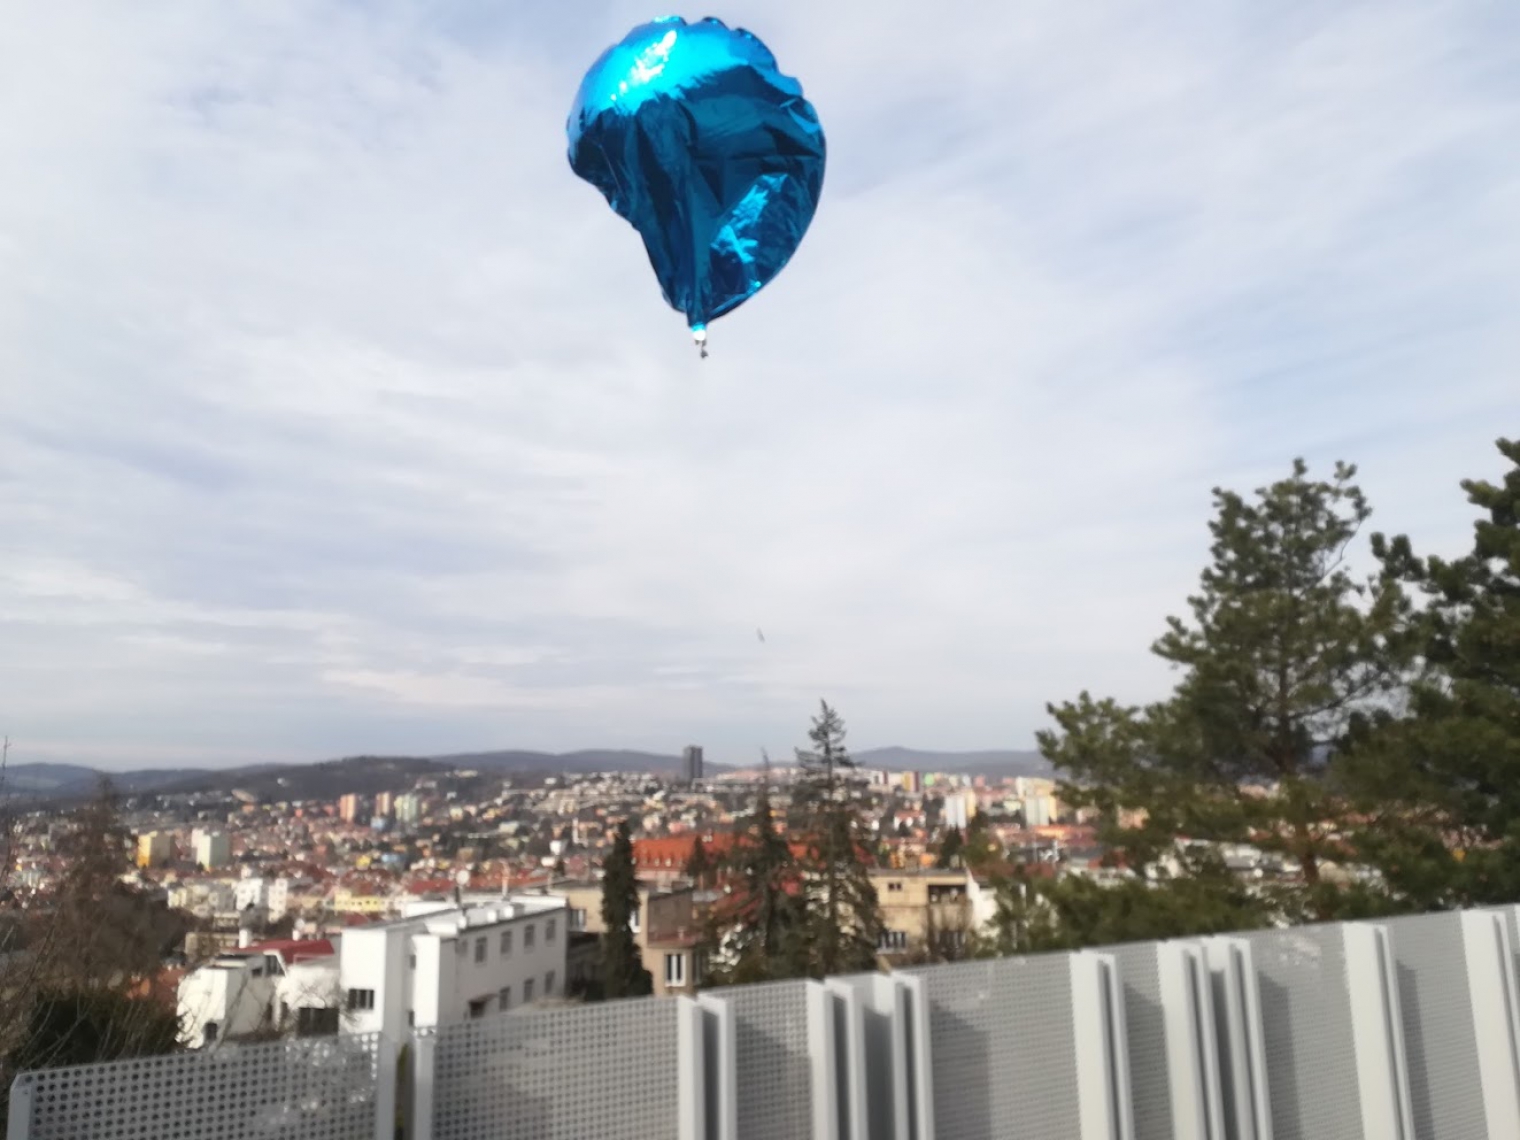 PicoBalloon Challenge 2019 has started